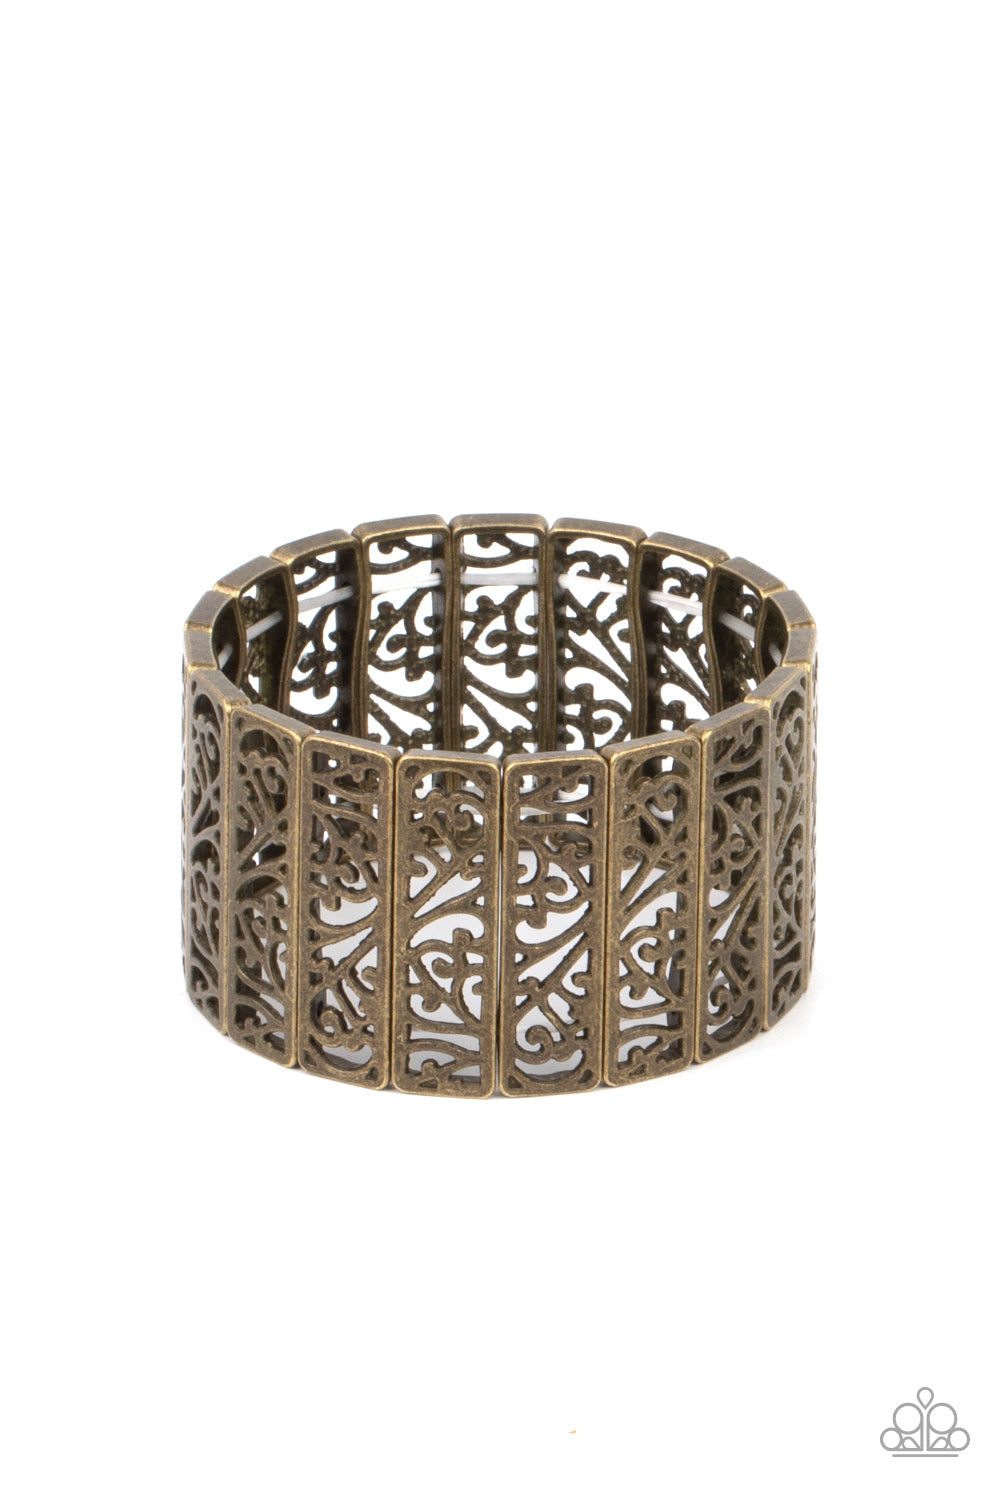 Ornate Orchards - Brass Bracelet - Paparazzi Accessories - Filled with vine-like filigree centers, dainty brass rectangular frames are threaded along stretchy bands around the wrist for a seasonal inspired fashion. Sold as one individual bracelet.